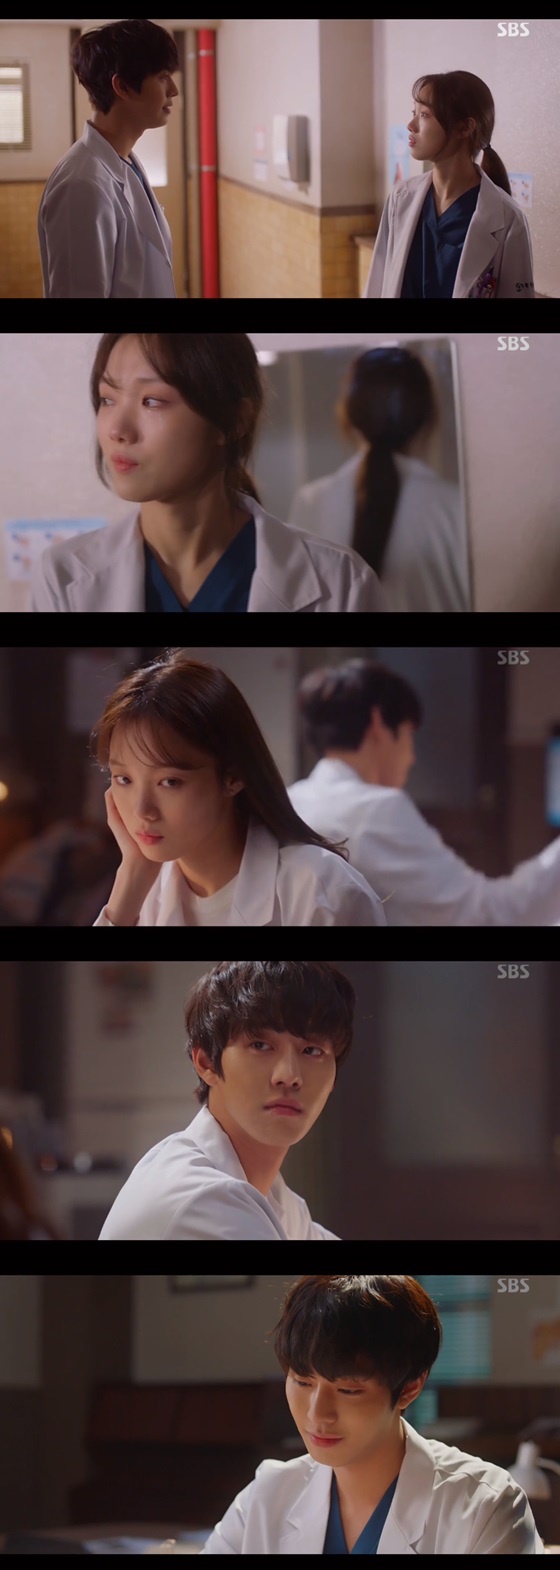 Romantic Doctor Kim Sabu 2 Lee Sung-kyung unravels Misunderstood and apologizes for Ahn Hyo-seopIn SBS Mon-Tue drama Romantic Doctor Kim Sabu 2 (playplay by Kang Eun-kyung, director Yoo In-sik, hereinafter referred to as Kim Sabu 2), which was broadcast on the afternoon of the 14th, there would have been a connection with the doctors of the main office by seeing Seo Woo Jin (Ahn Hyo-seop) who entered the second surgery of the minister instead of himself. a figure of a kyung man).On the same day, the members of the Doldam Hospital, led by Kim Sa-bu (Han Seok-gyu), operated on the secretary at the 2nd operating room and the members of the main office, led by Park Min-guk (Kim Joo-heon), operated on the defense minister at the 1st operating room, which is next to him.Yang Ho-joon (Ko Sang-ho), who accidentally touched the clip, left doubts that the ministers surgery was not finished stably.The arrow went to Kim Sa-bu, who performed the first surgery, and Seo Woo Jin, who entered both the first and second surgeries.Seo Woo Jin received Misunderstock from Oh Myung-sim (Jin Kyung-min) and Jang Gi-tae (Im Won-hee) that he received money from the main party and put Kim Sa-bu in Danger, and Kim Sa-bu also received Misunderstock that he valued title to the ministers Guardian.Cha Eun-jae also called Seo Woo Jin a bad child.She had previously suggested to Seo Woo Jin to join her in the second surgery, but she felt sorry for Seo Woo Jin, who refused.When Seo Woo Jin refused the proposal and showed up in the second operating room, Cha Eun-jae resented the fact that he came down to the Doldam Hospital feeling betrayed by Seo Woo Jin.Cha Eun-jae told Seo Woo Jin, You took my operating room. It was an opportunity to go back to the house.You are originally money, so you have no friends and no friends. Seo Woo Jin, who heard this, was enthusiastically accepted by Cha Eun-jae, who sold himself, and Cha Eun-jae cried alone.Ironically, she worked as a solver to remove the doubt of Seo Woo Jin.I came across the fact that Yang Ho-joon had a video of the second operation in USB.Cha Eun-jae intentionally helped Seo Woo Jin solve Misunderstood by mentioning that there is a USB with a second surgery video to Yang Ho-joon at the Guardian of Park Min-guk and the minister.After learning that Seo Woo Jin did not go into the second surgery on his own, Cha Eun-jae did not know that he was sorry to meet Seo Woo Jin in the medical country.She broke the awkward airflow and apologized, I was sorry, I was a bit too much, especially when I told the traitor opportunist.Seo Woo Jin accepted this coolly without hesitation.So, Cha Eun-jae said, I will see you tomorrow.Seo Woo Jin, who was watching Cha Eun-jae, who was out of the country, was also happy to recover her relationship with a smile.Cha Eun-jae and Seo Woo Jins quarrel and reconciliation narrowed the emotional goal between the two since the last episode and gave a smile.At the end of the broadcast, the debtors of Seo Woo Jin burst into the door of Doldam Hospital, and attention is focused on the new Danger that will be suitable for Seo Woo Jin in the future.